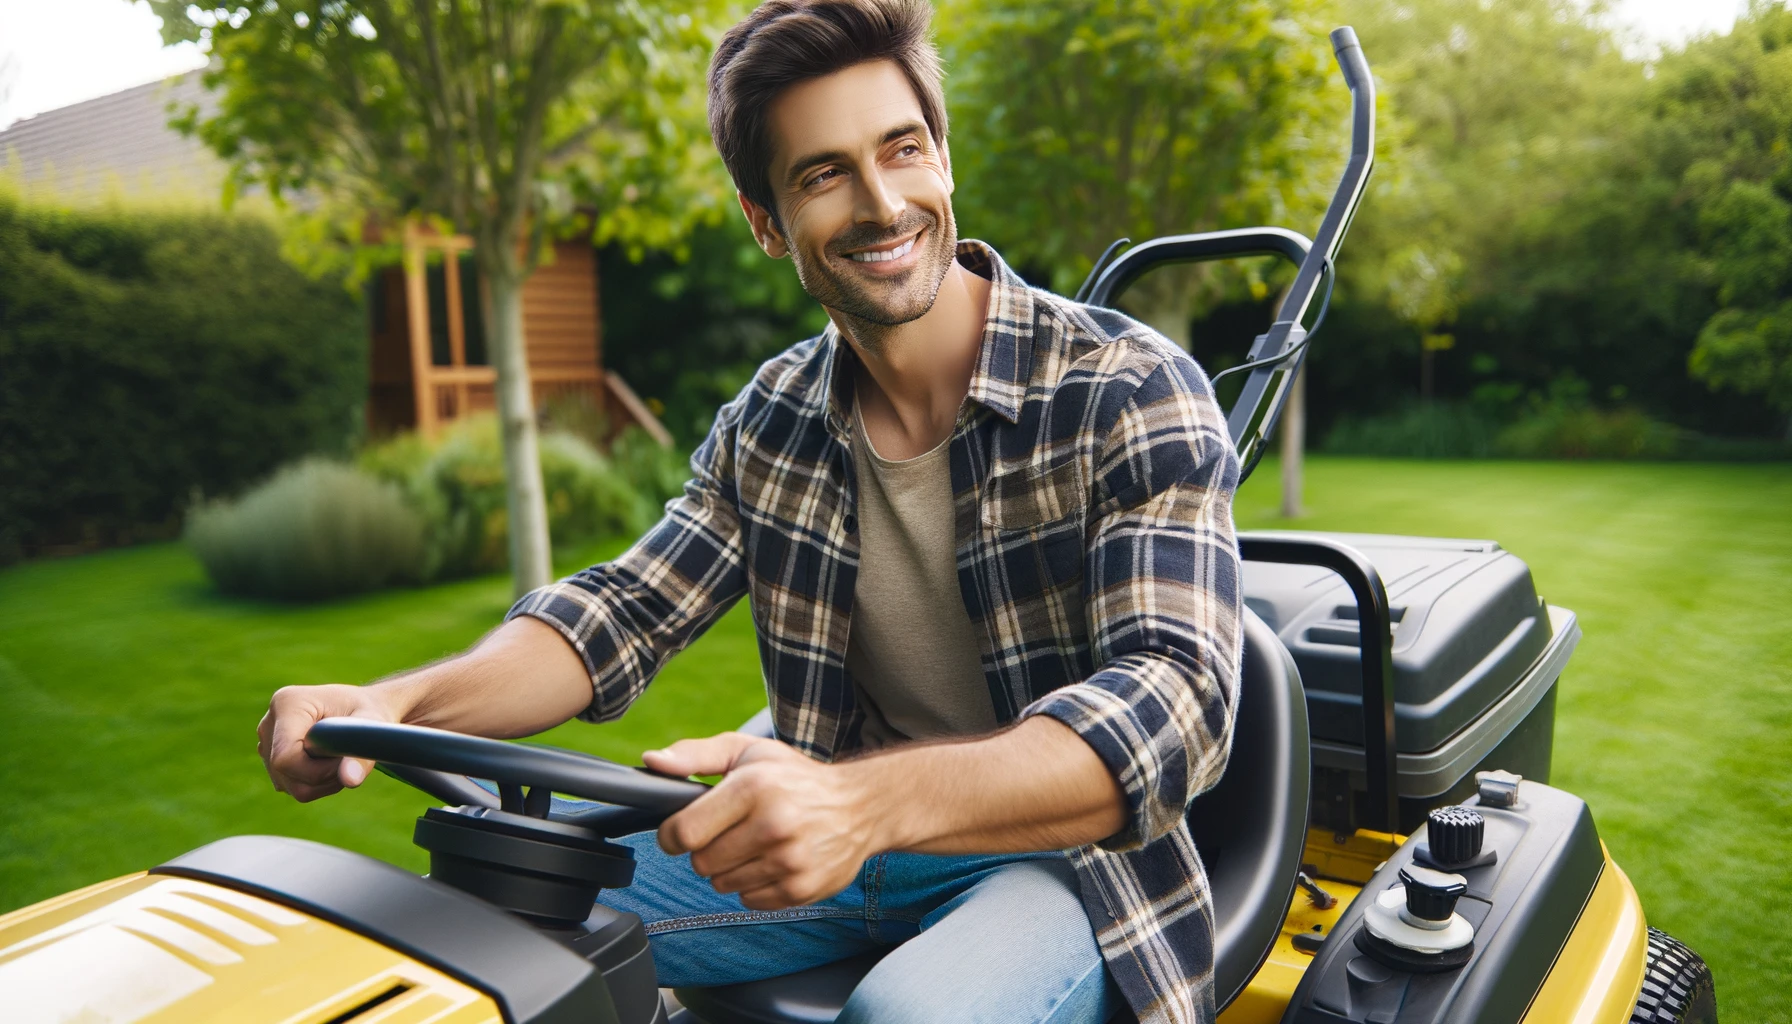 How-to DIY tips to keep your lawn mower in top shape